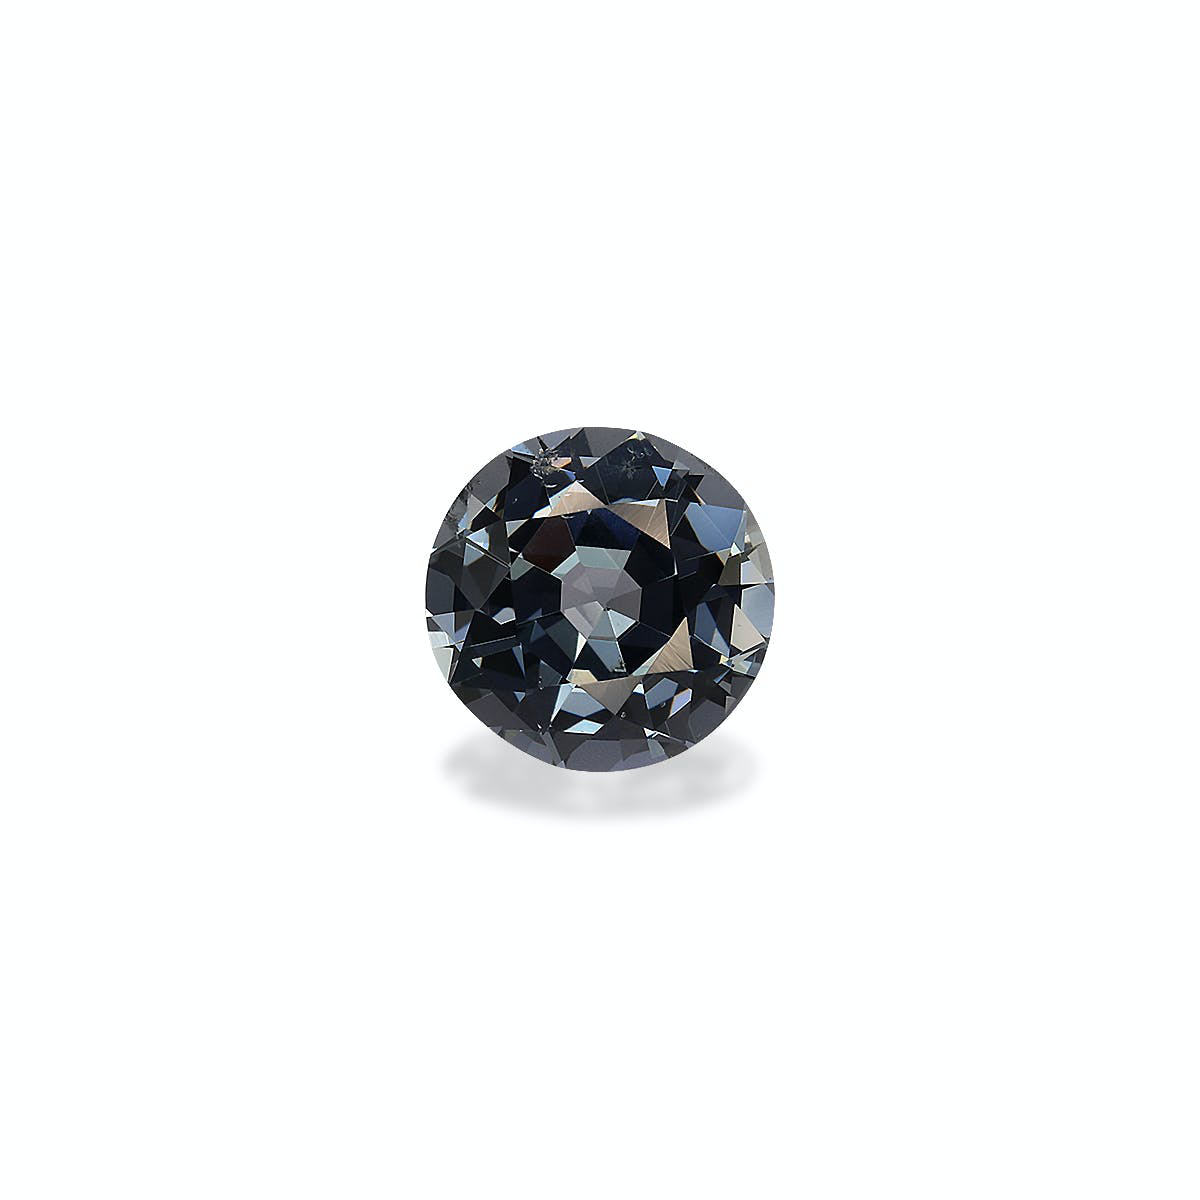 Picture of Metallic Grey Spinel 1.36ct - 6mm (SP0389)